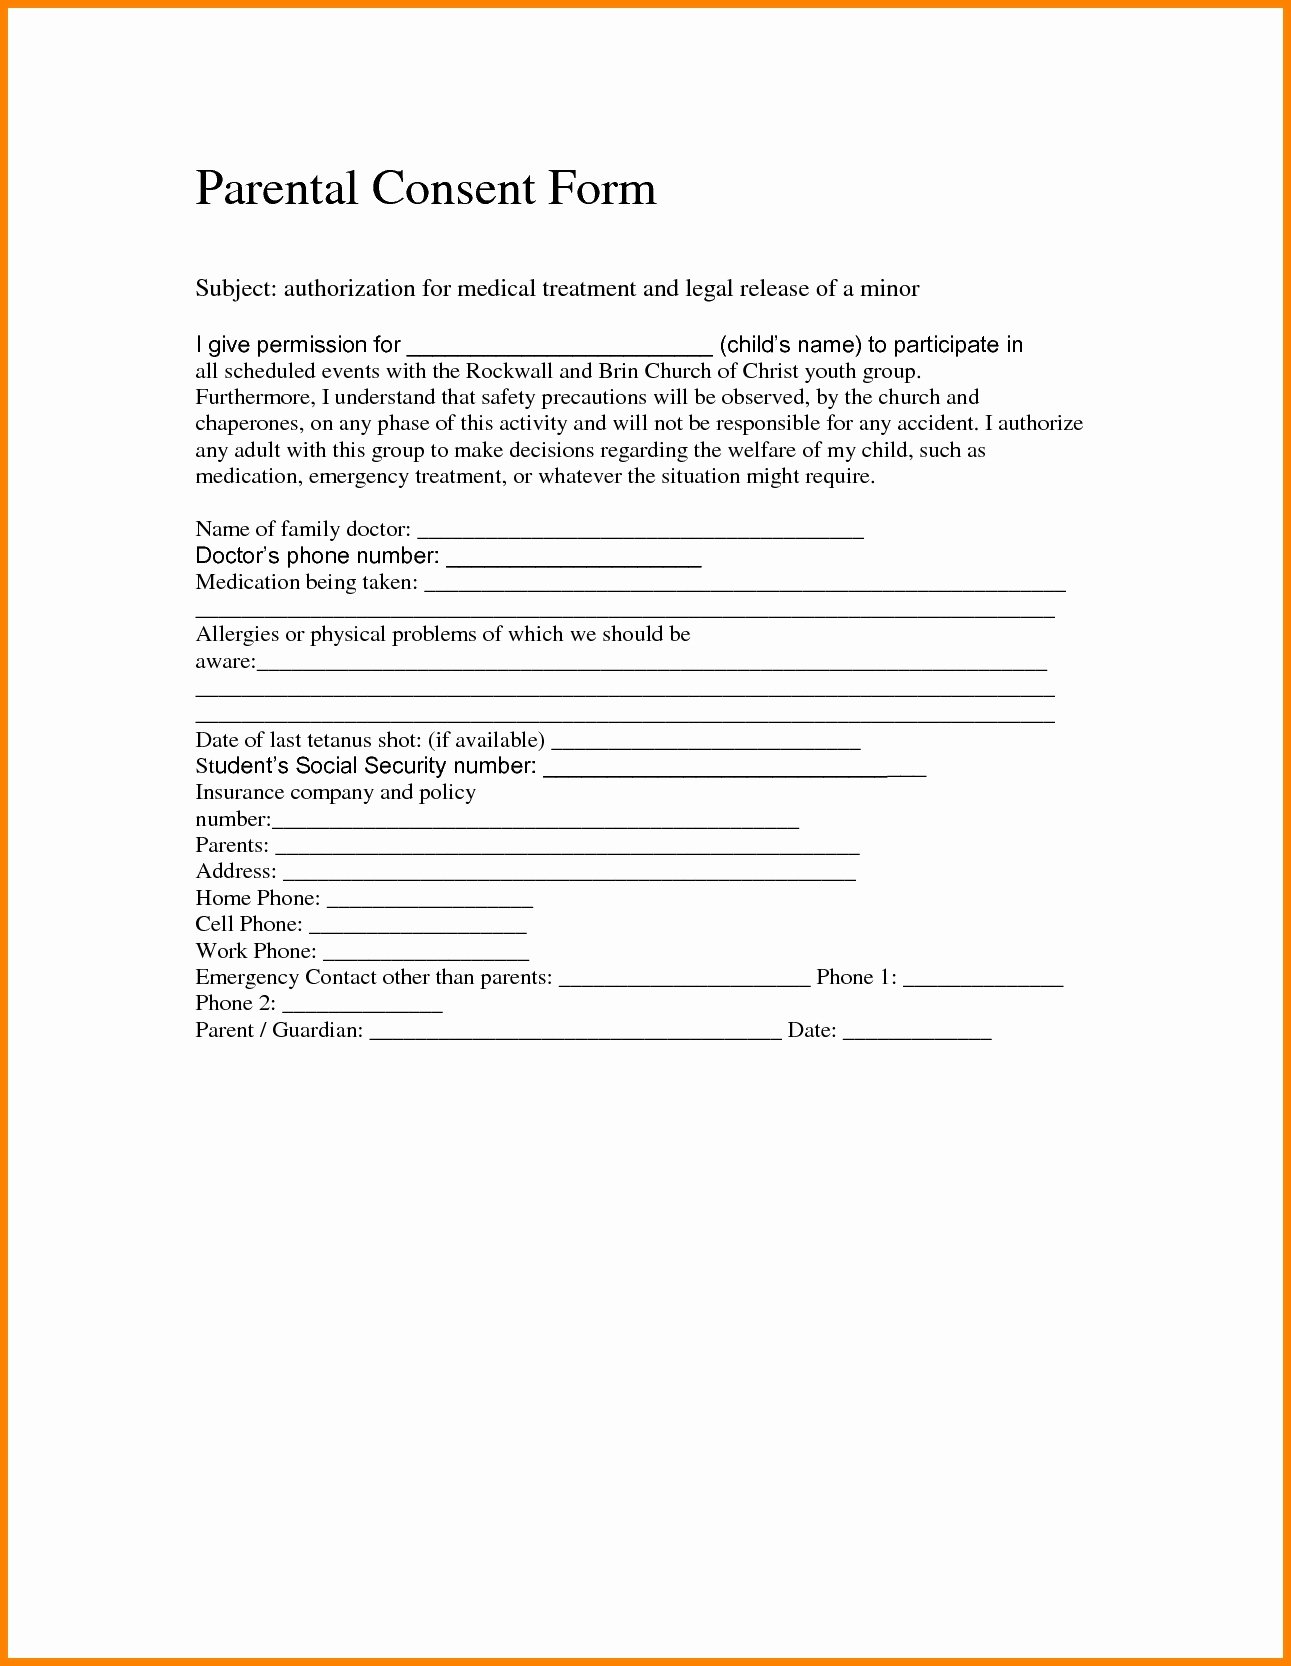 Child Travel Consent form Template New Consent Letter for Children Travelling Abroad 2018